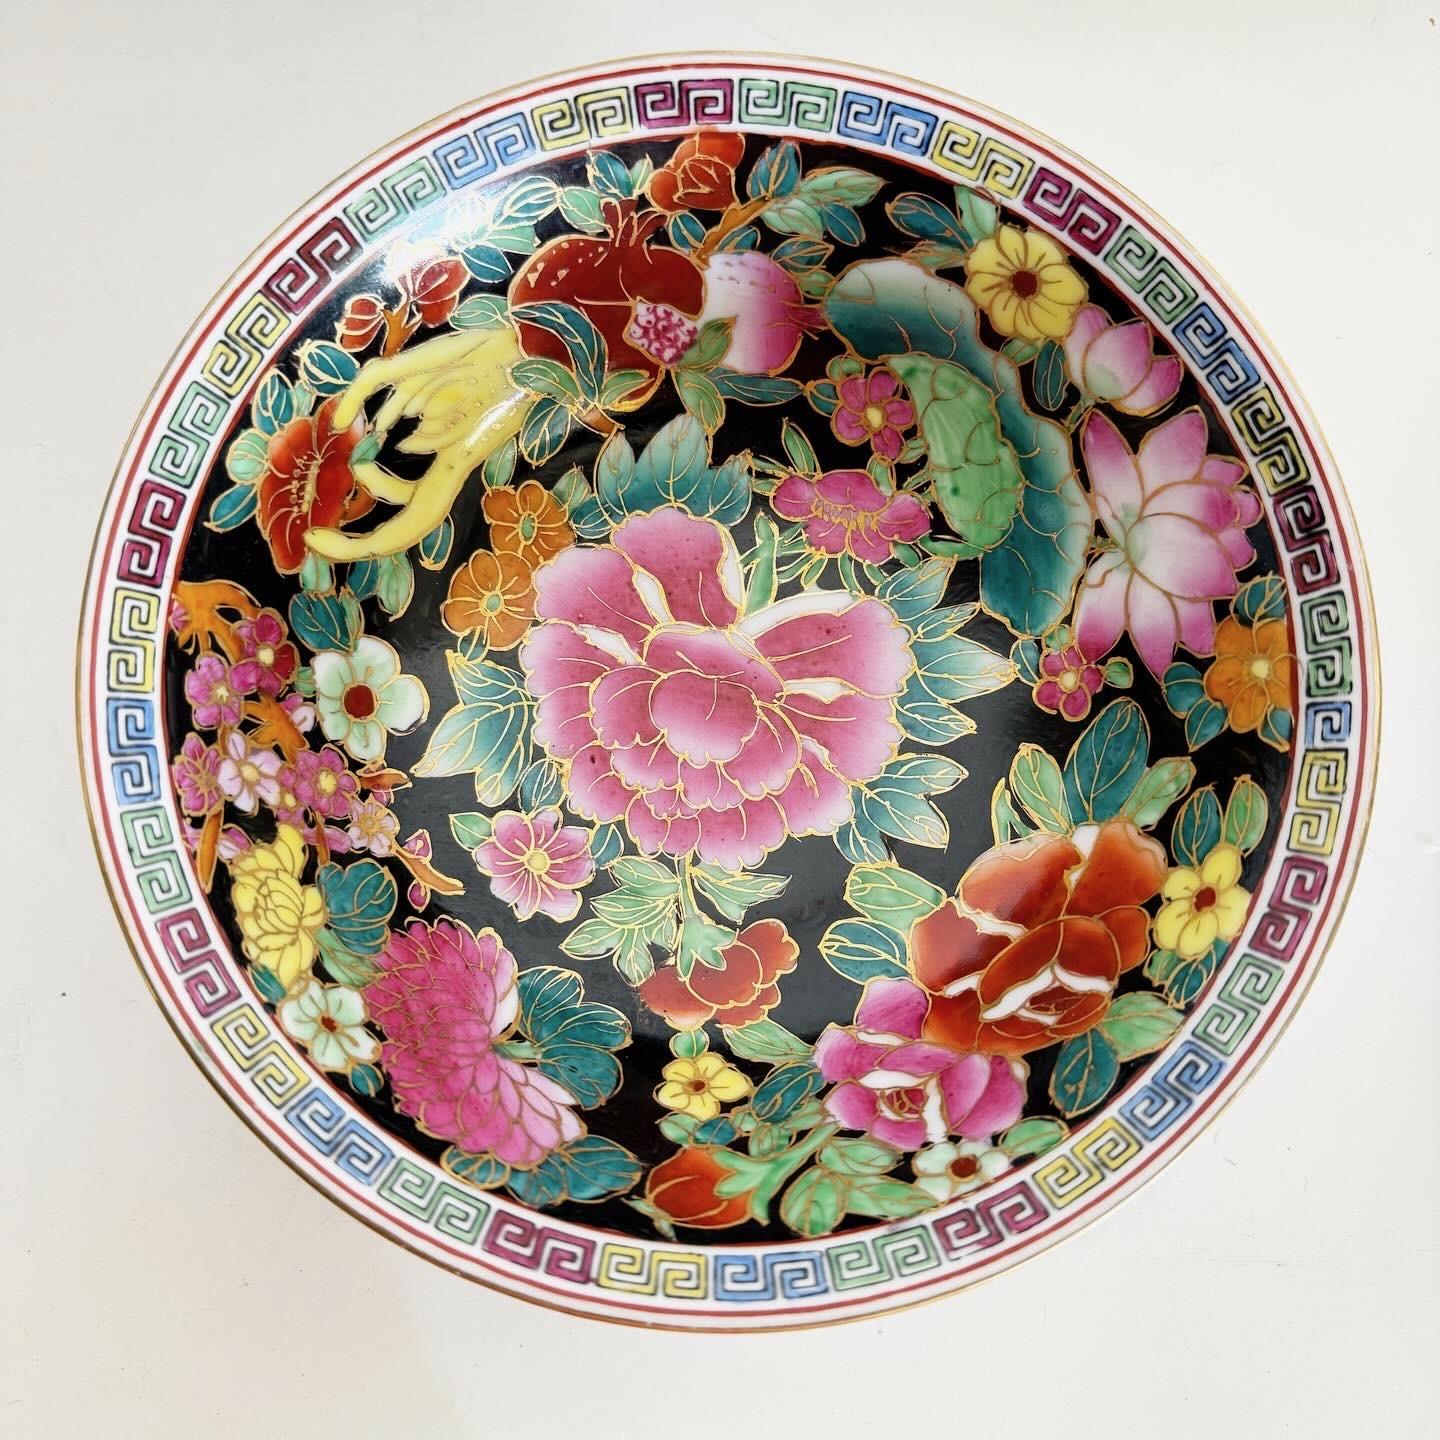 Experience traditional Chinese elegance with this set of hand-painted porcelain bowls and matching spoons for two. Adorned with vibrant designs and motifs, from floral patterns to dragons, this set reflects the exquisite craftsmanship of Chinese